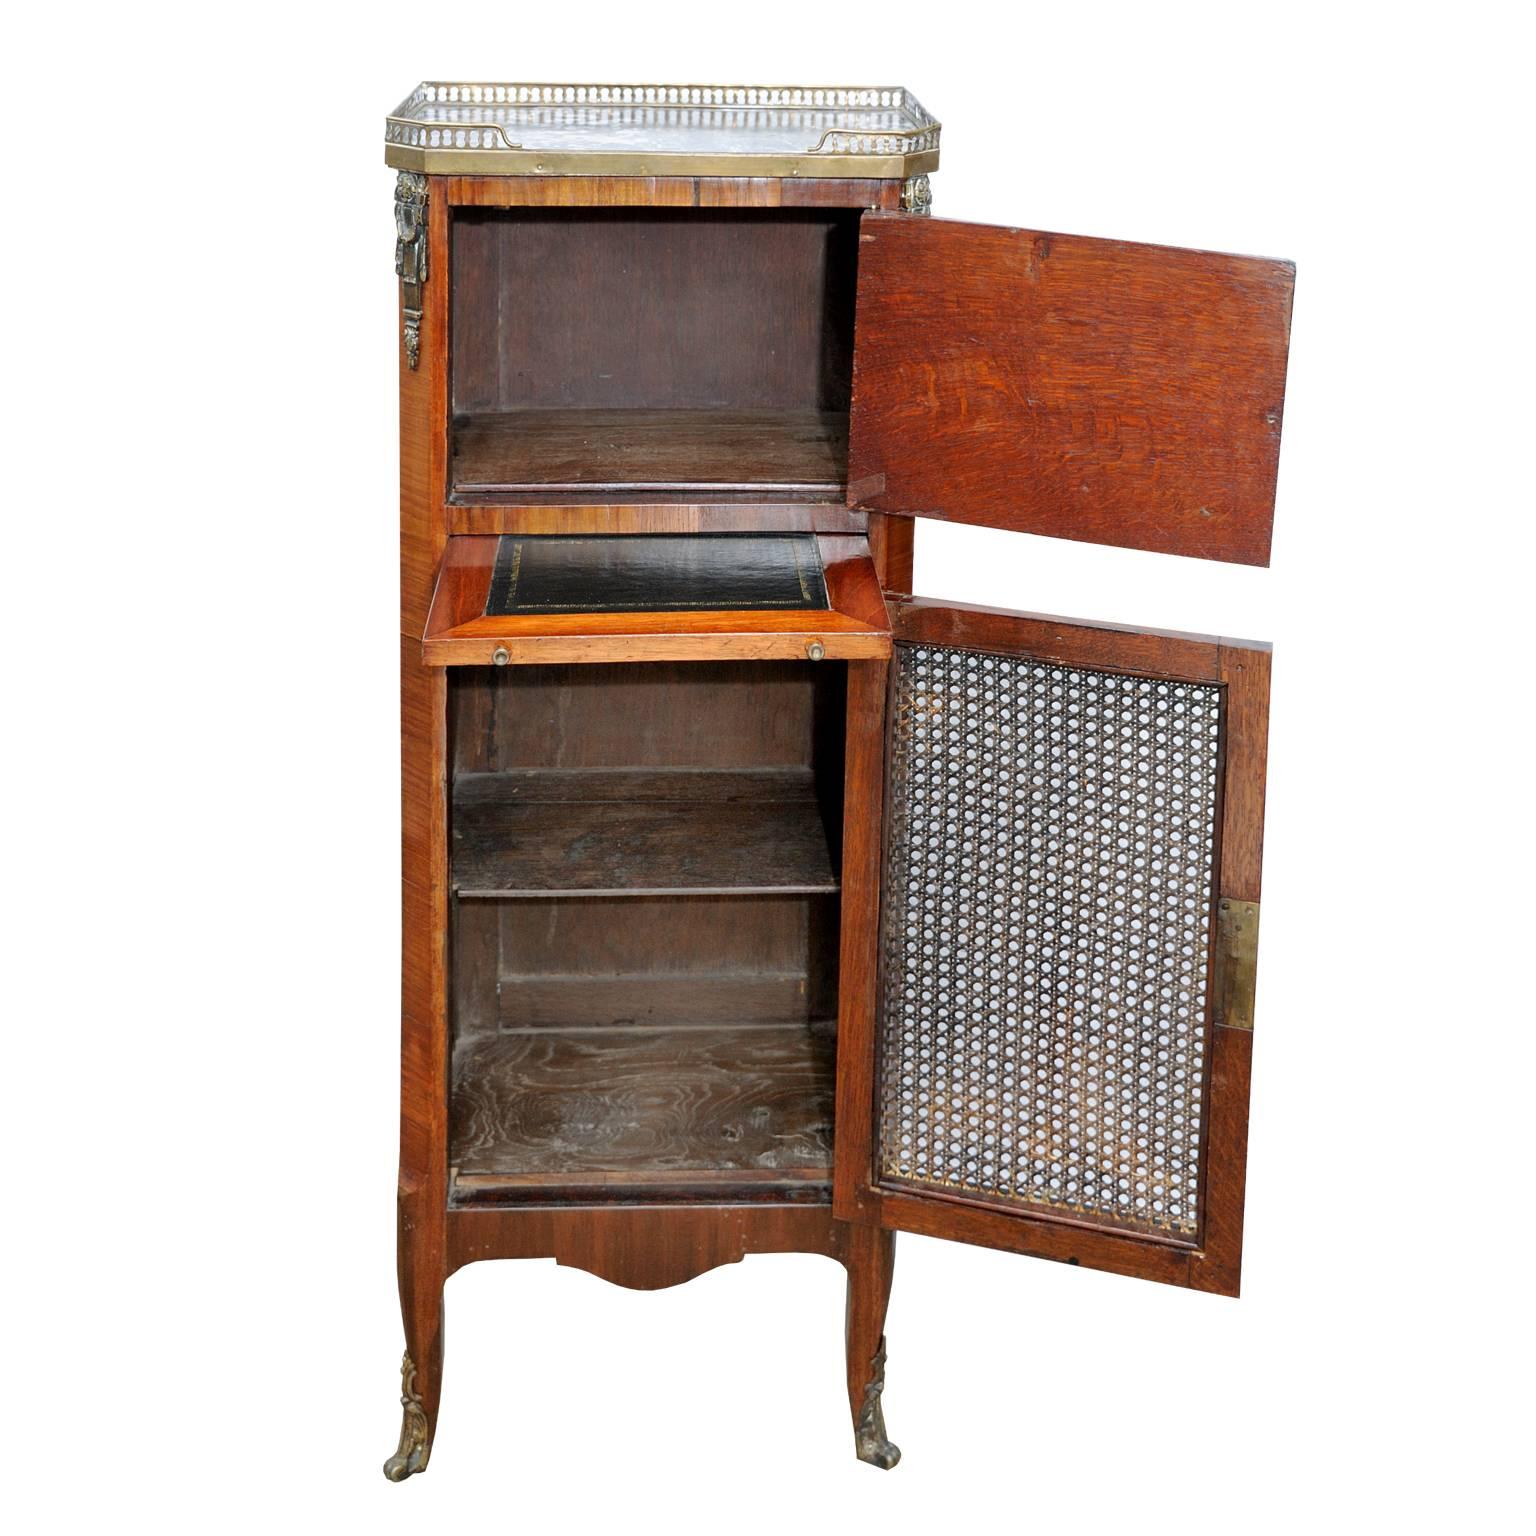 This is a rather lovely French 19th century Louis XVI style small rosewood secretaire with a marble top and brass gallery, with pull-out tooled black leather writing slide.

The top door has been finished with faux leather book spines and the